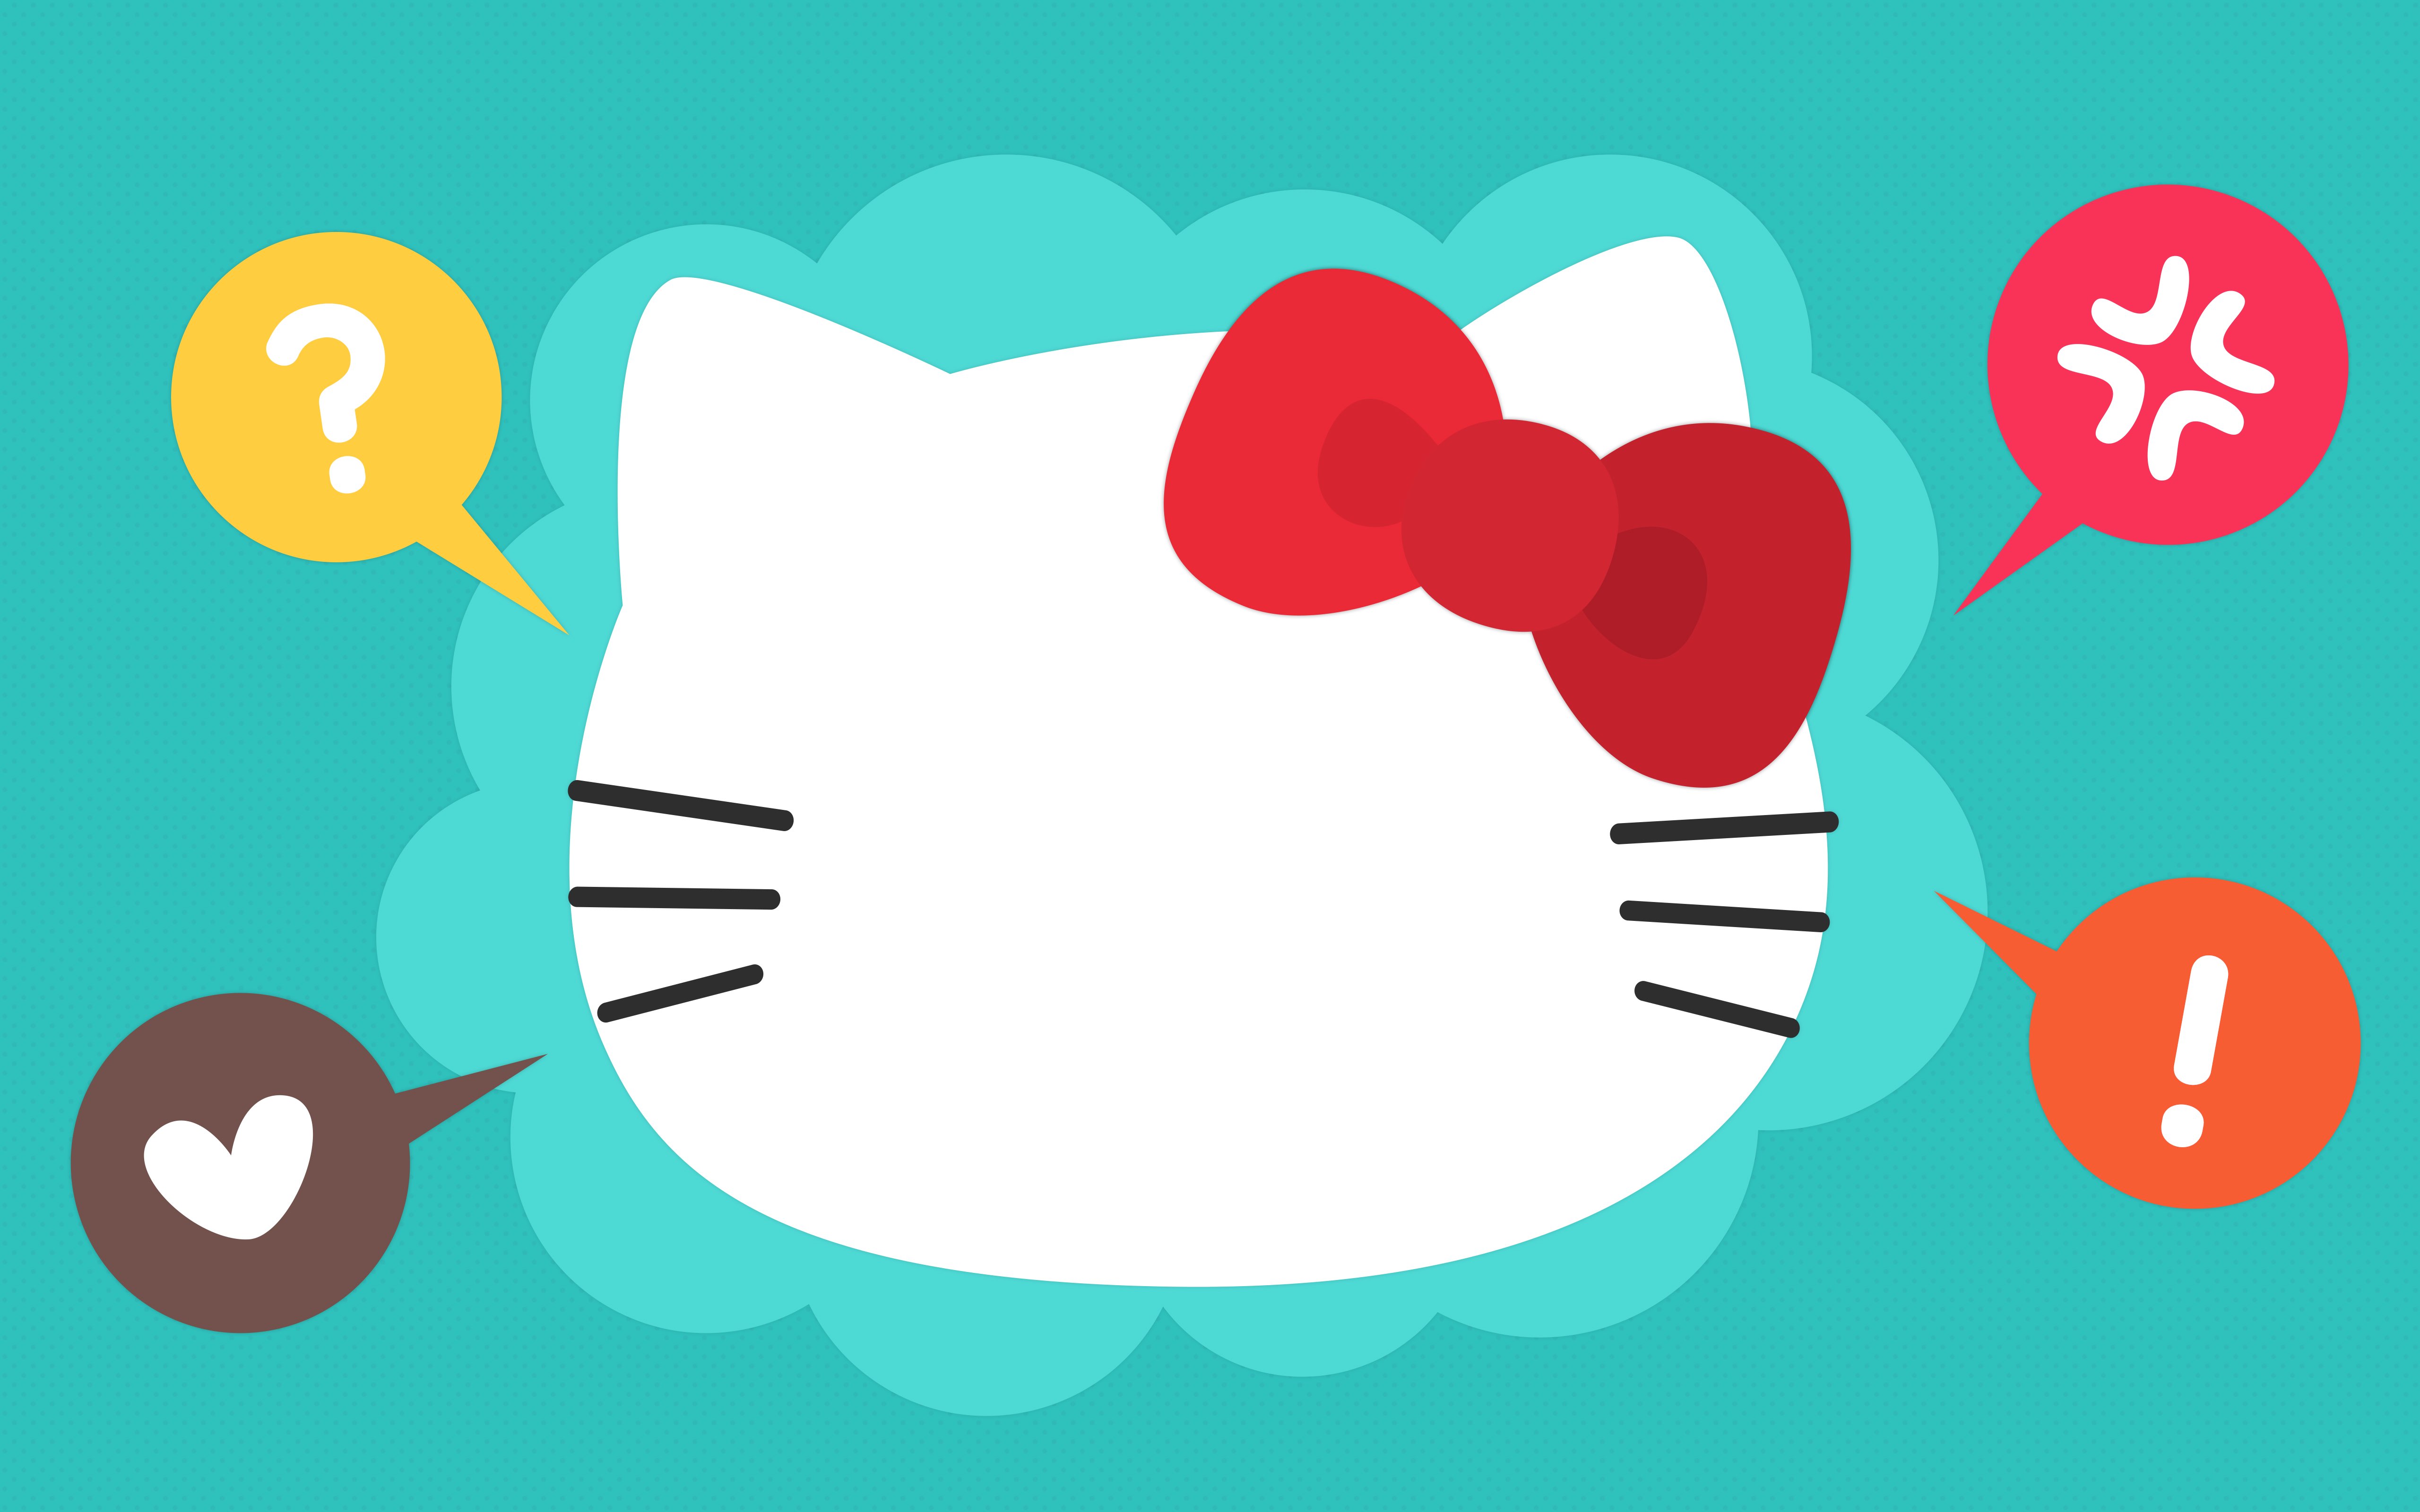 The Secret Behind Hello Kitty's Blank Face